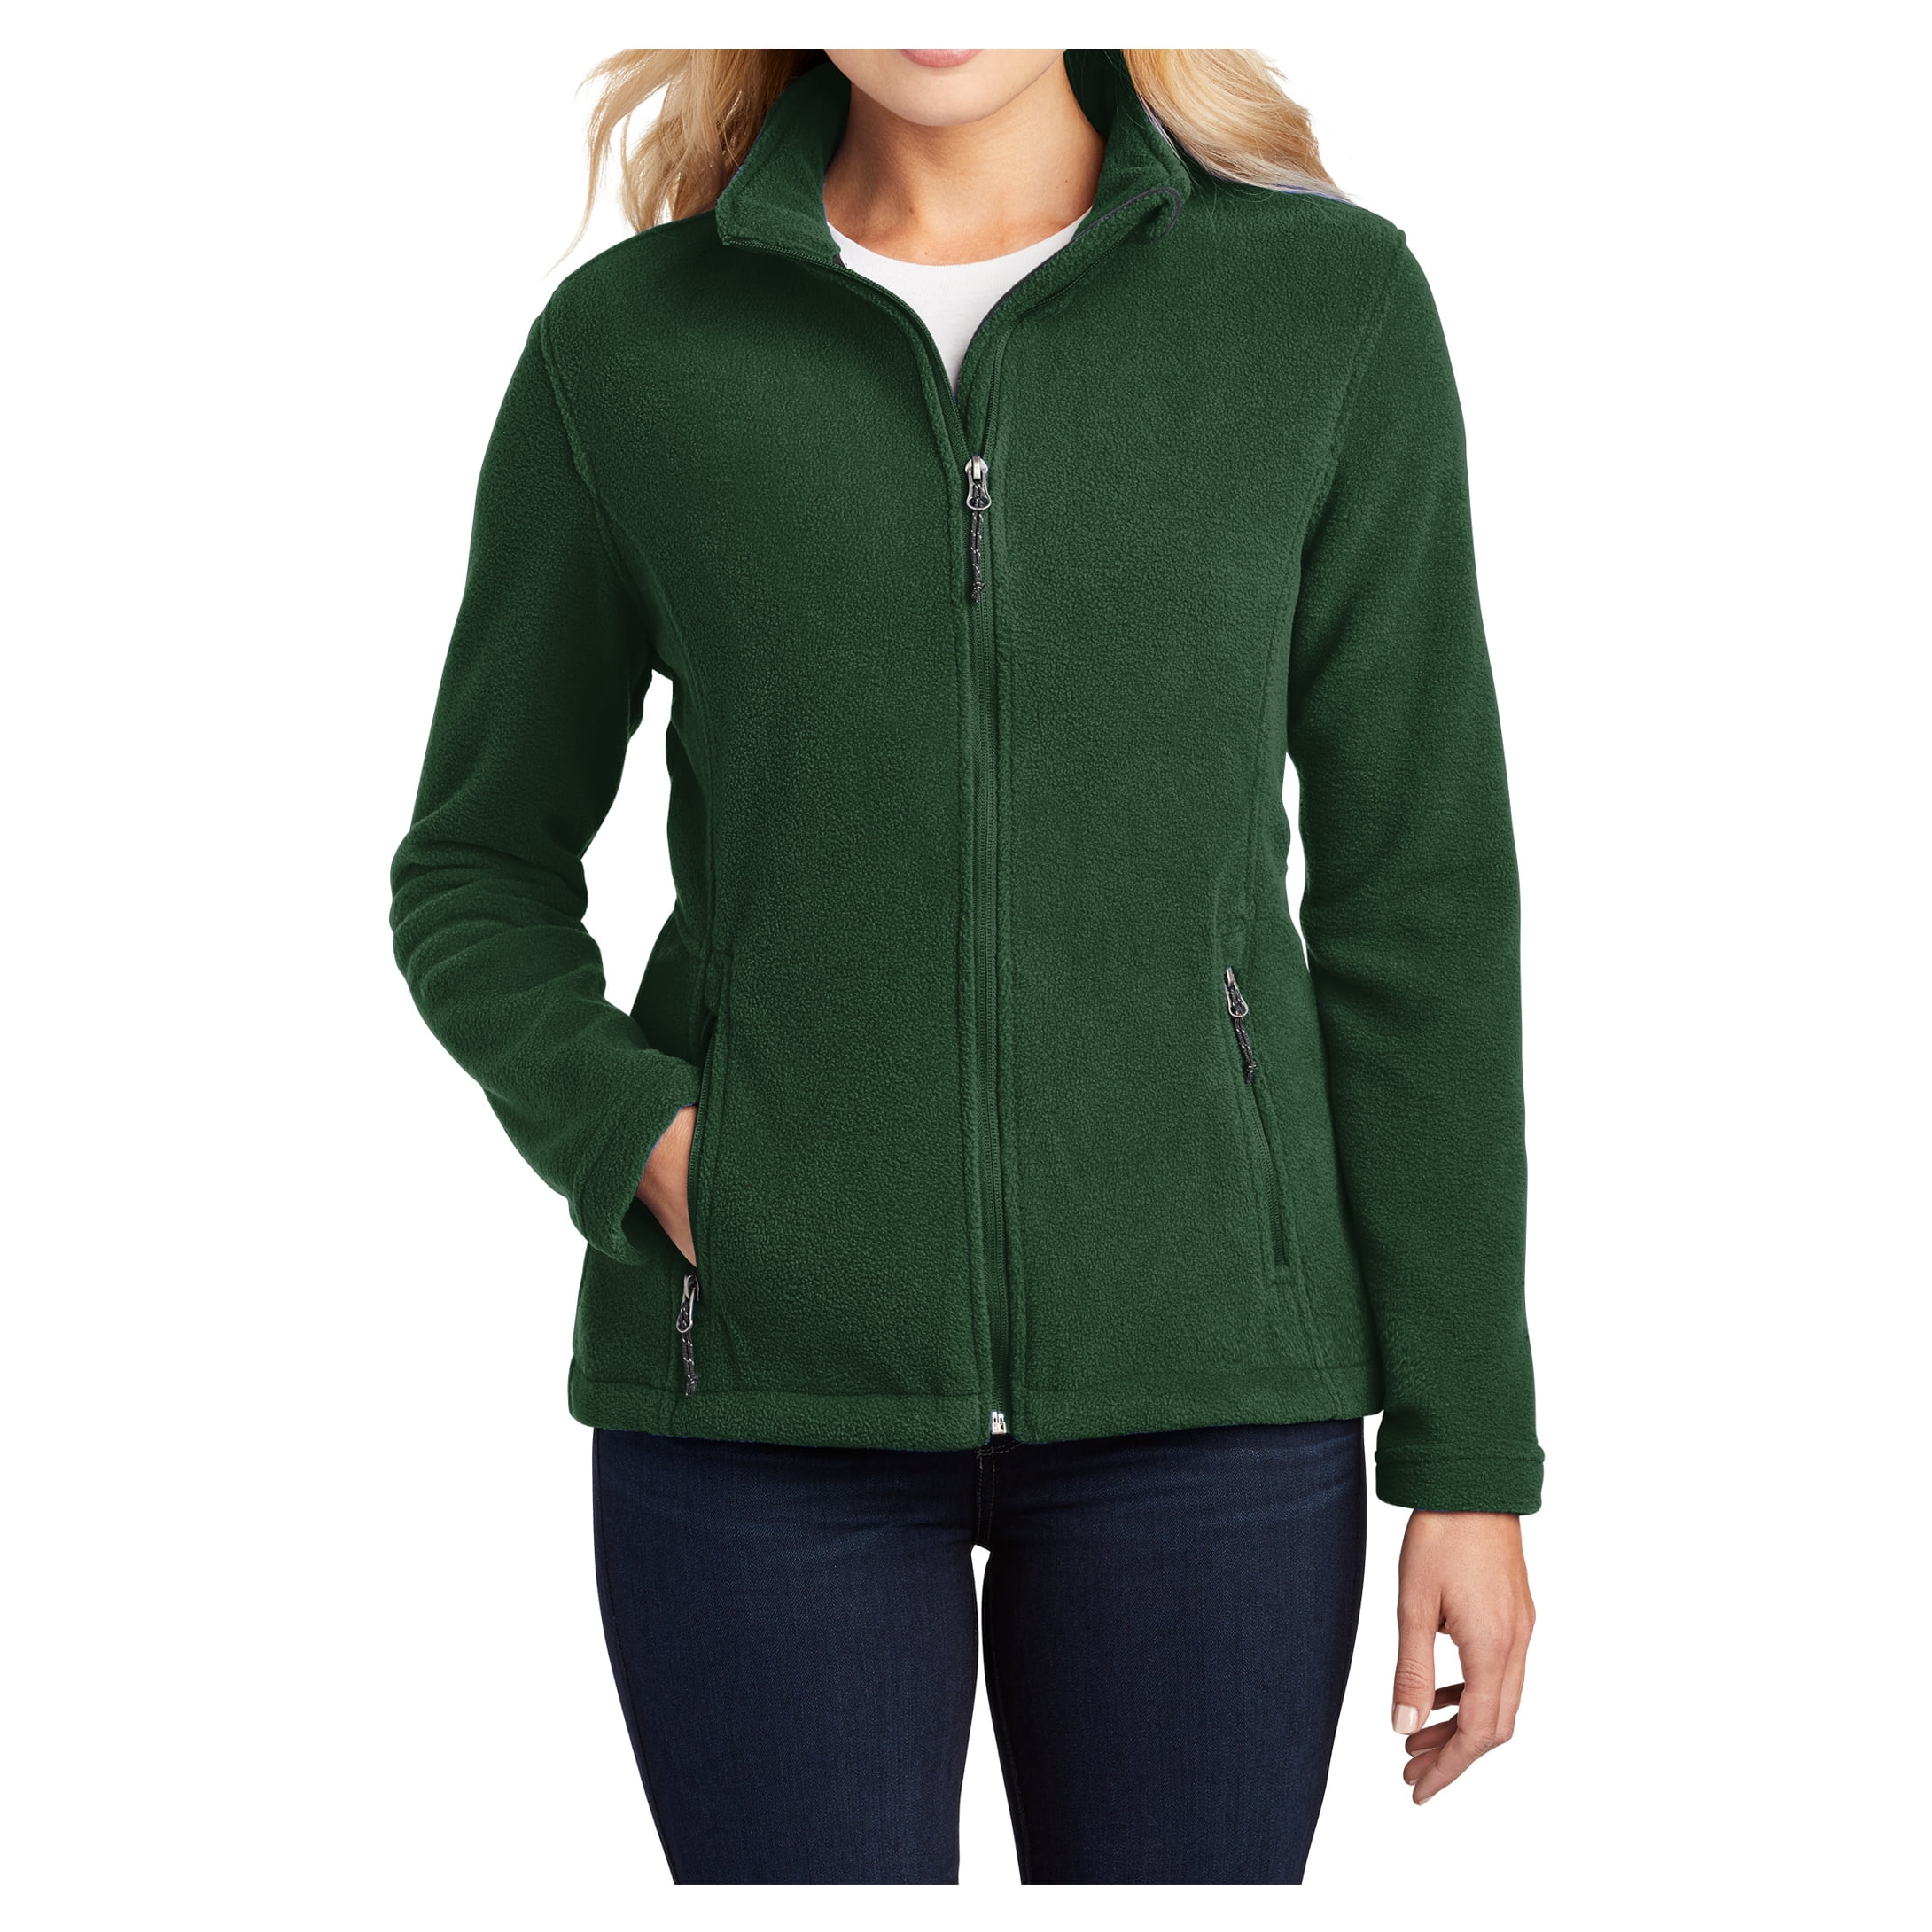 Womens Value Fleece Polyester Jacket Forest Green 4X-Large